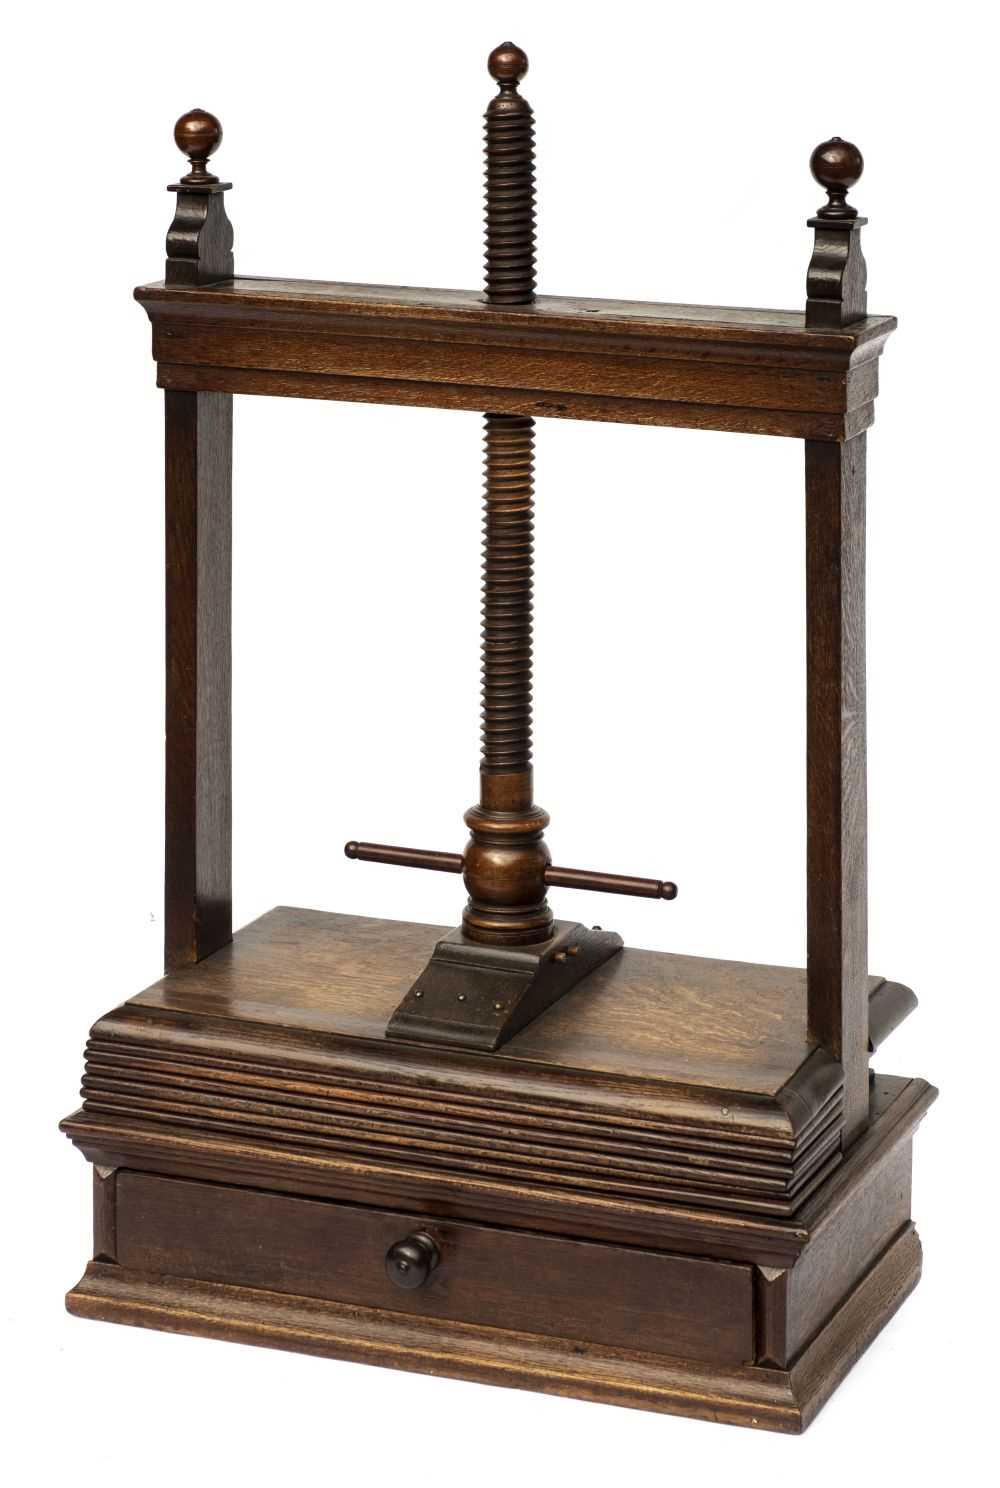 Lot 122 - Book press. A fine stained oak book or linen press with integral fitted drawer, 19th century